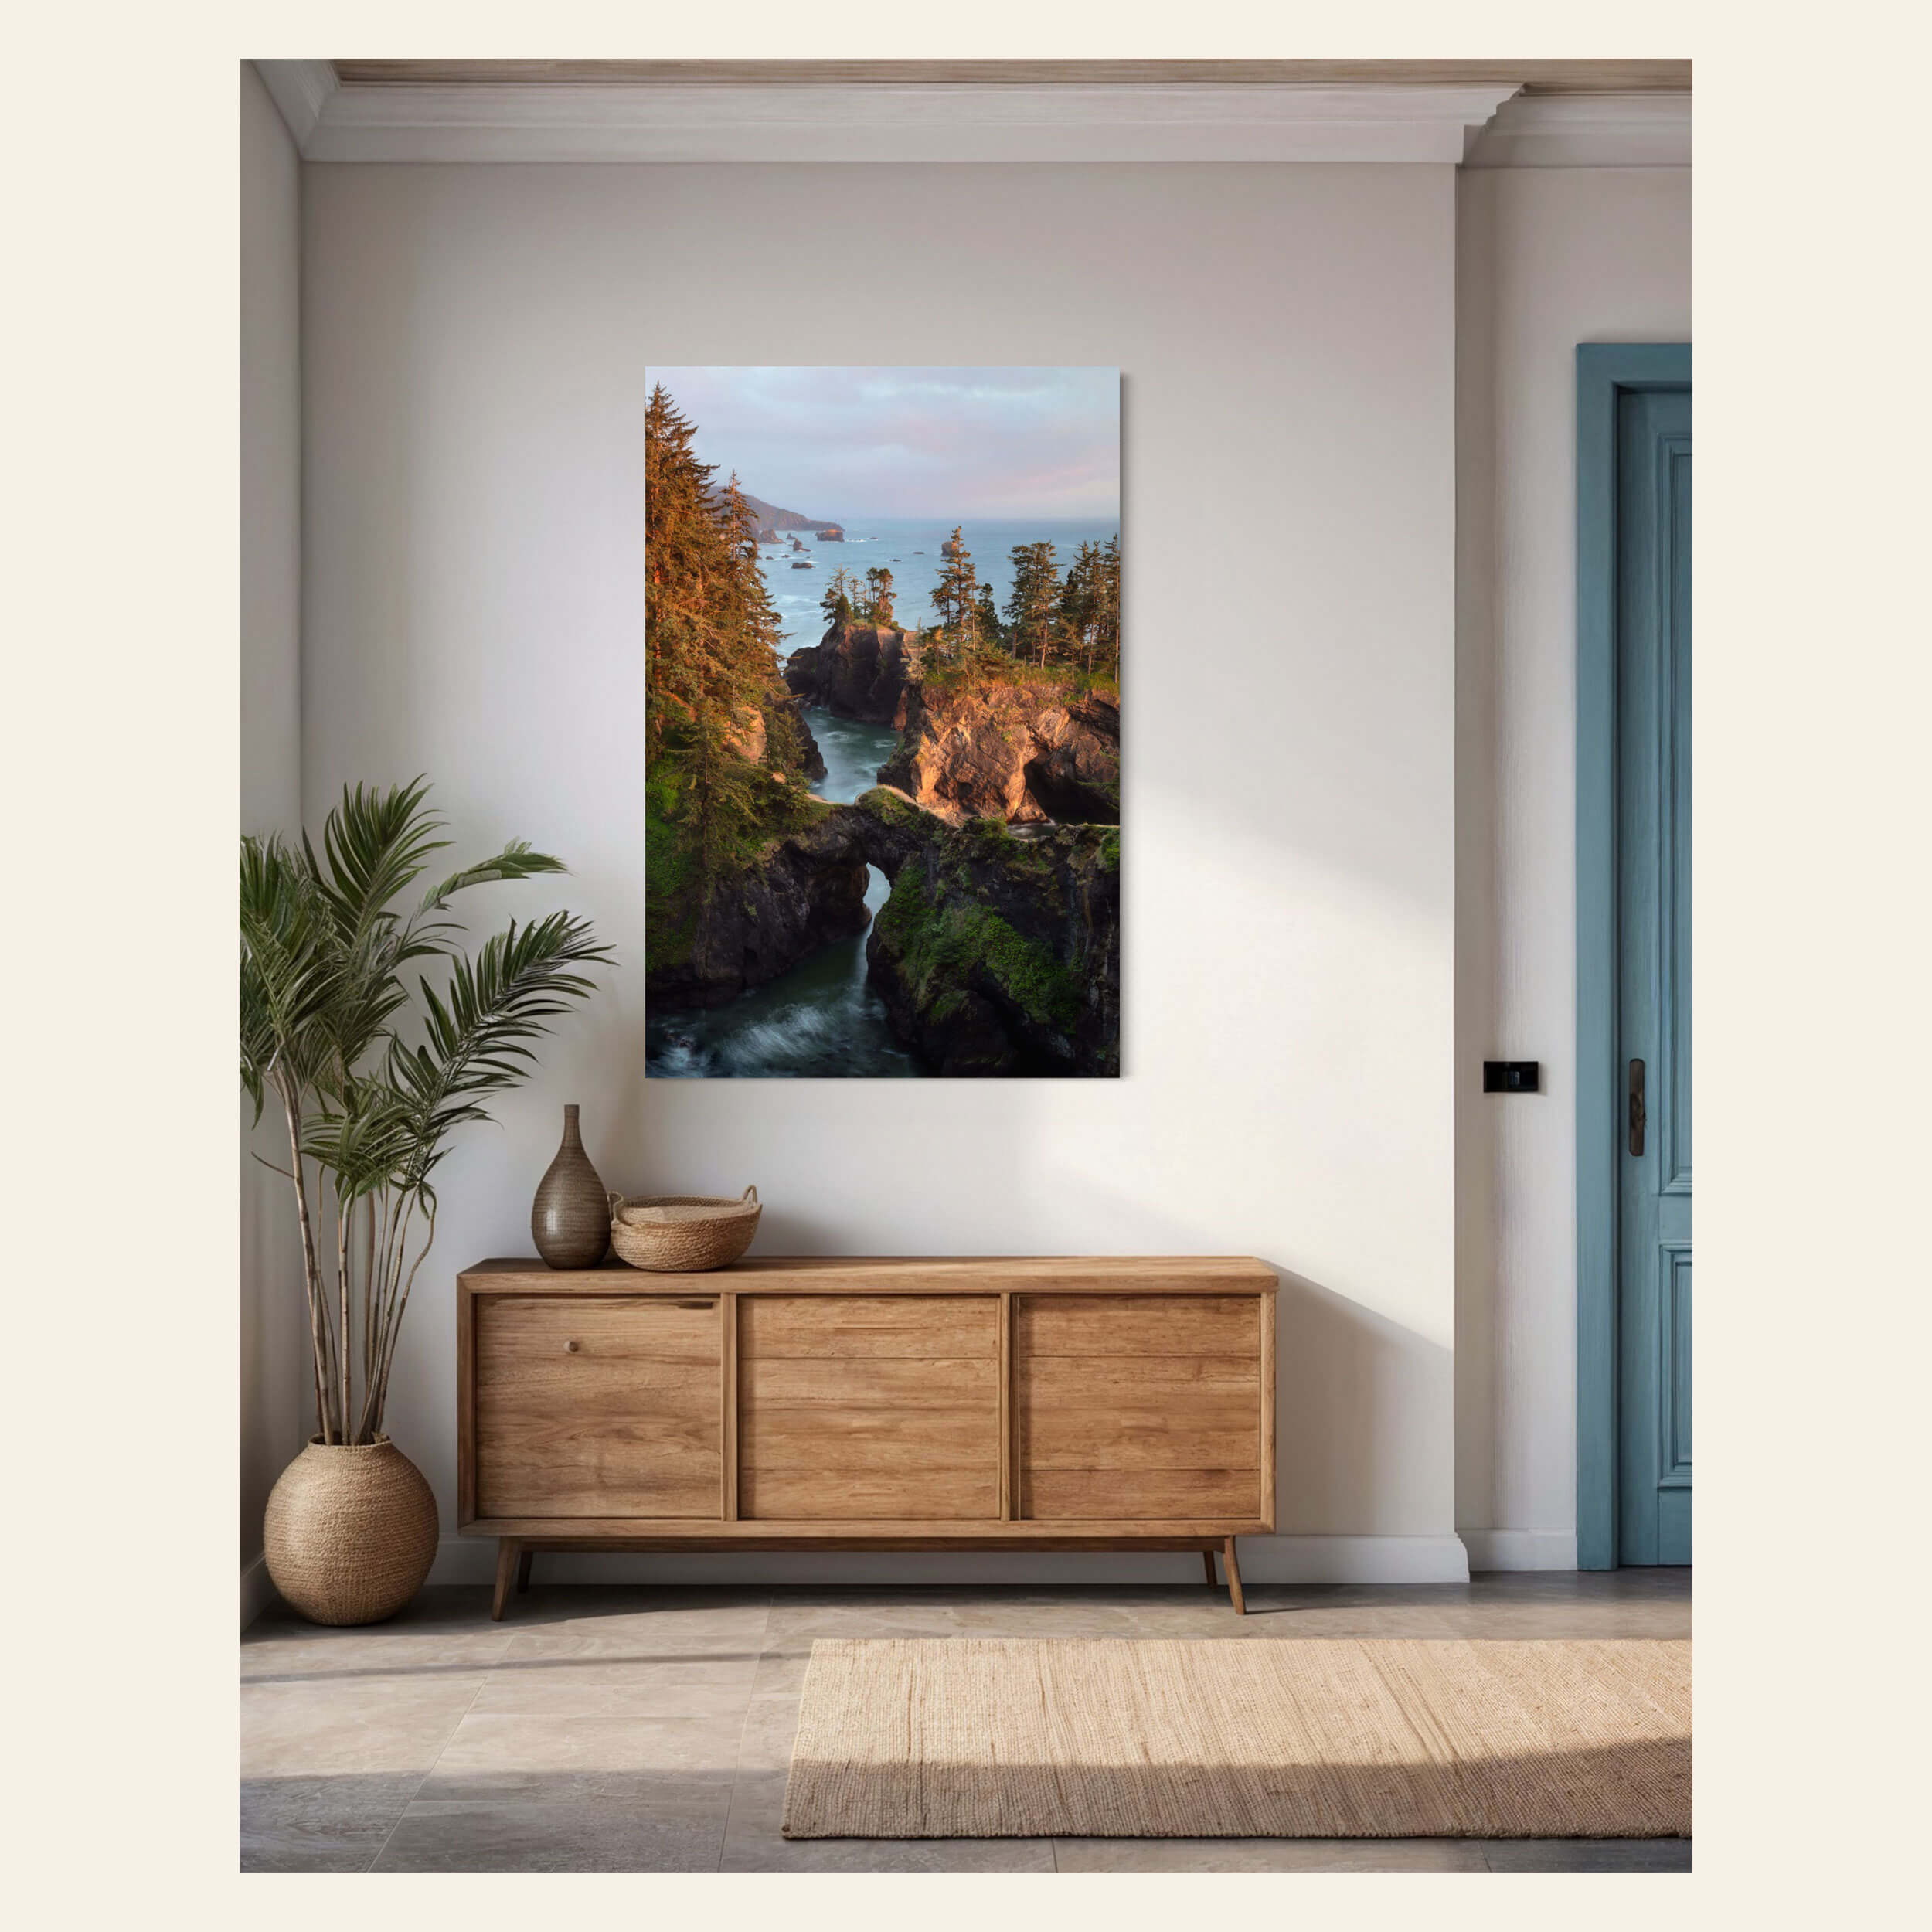 A Natural Bridges picture from the Southern Oregon Coast hangs in an entryway.